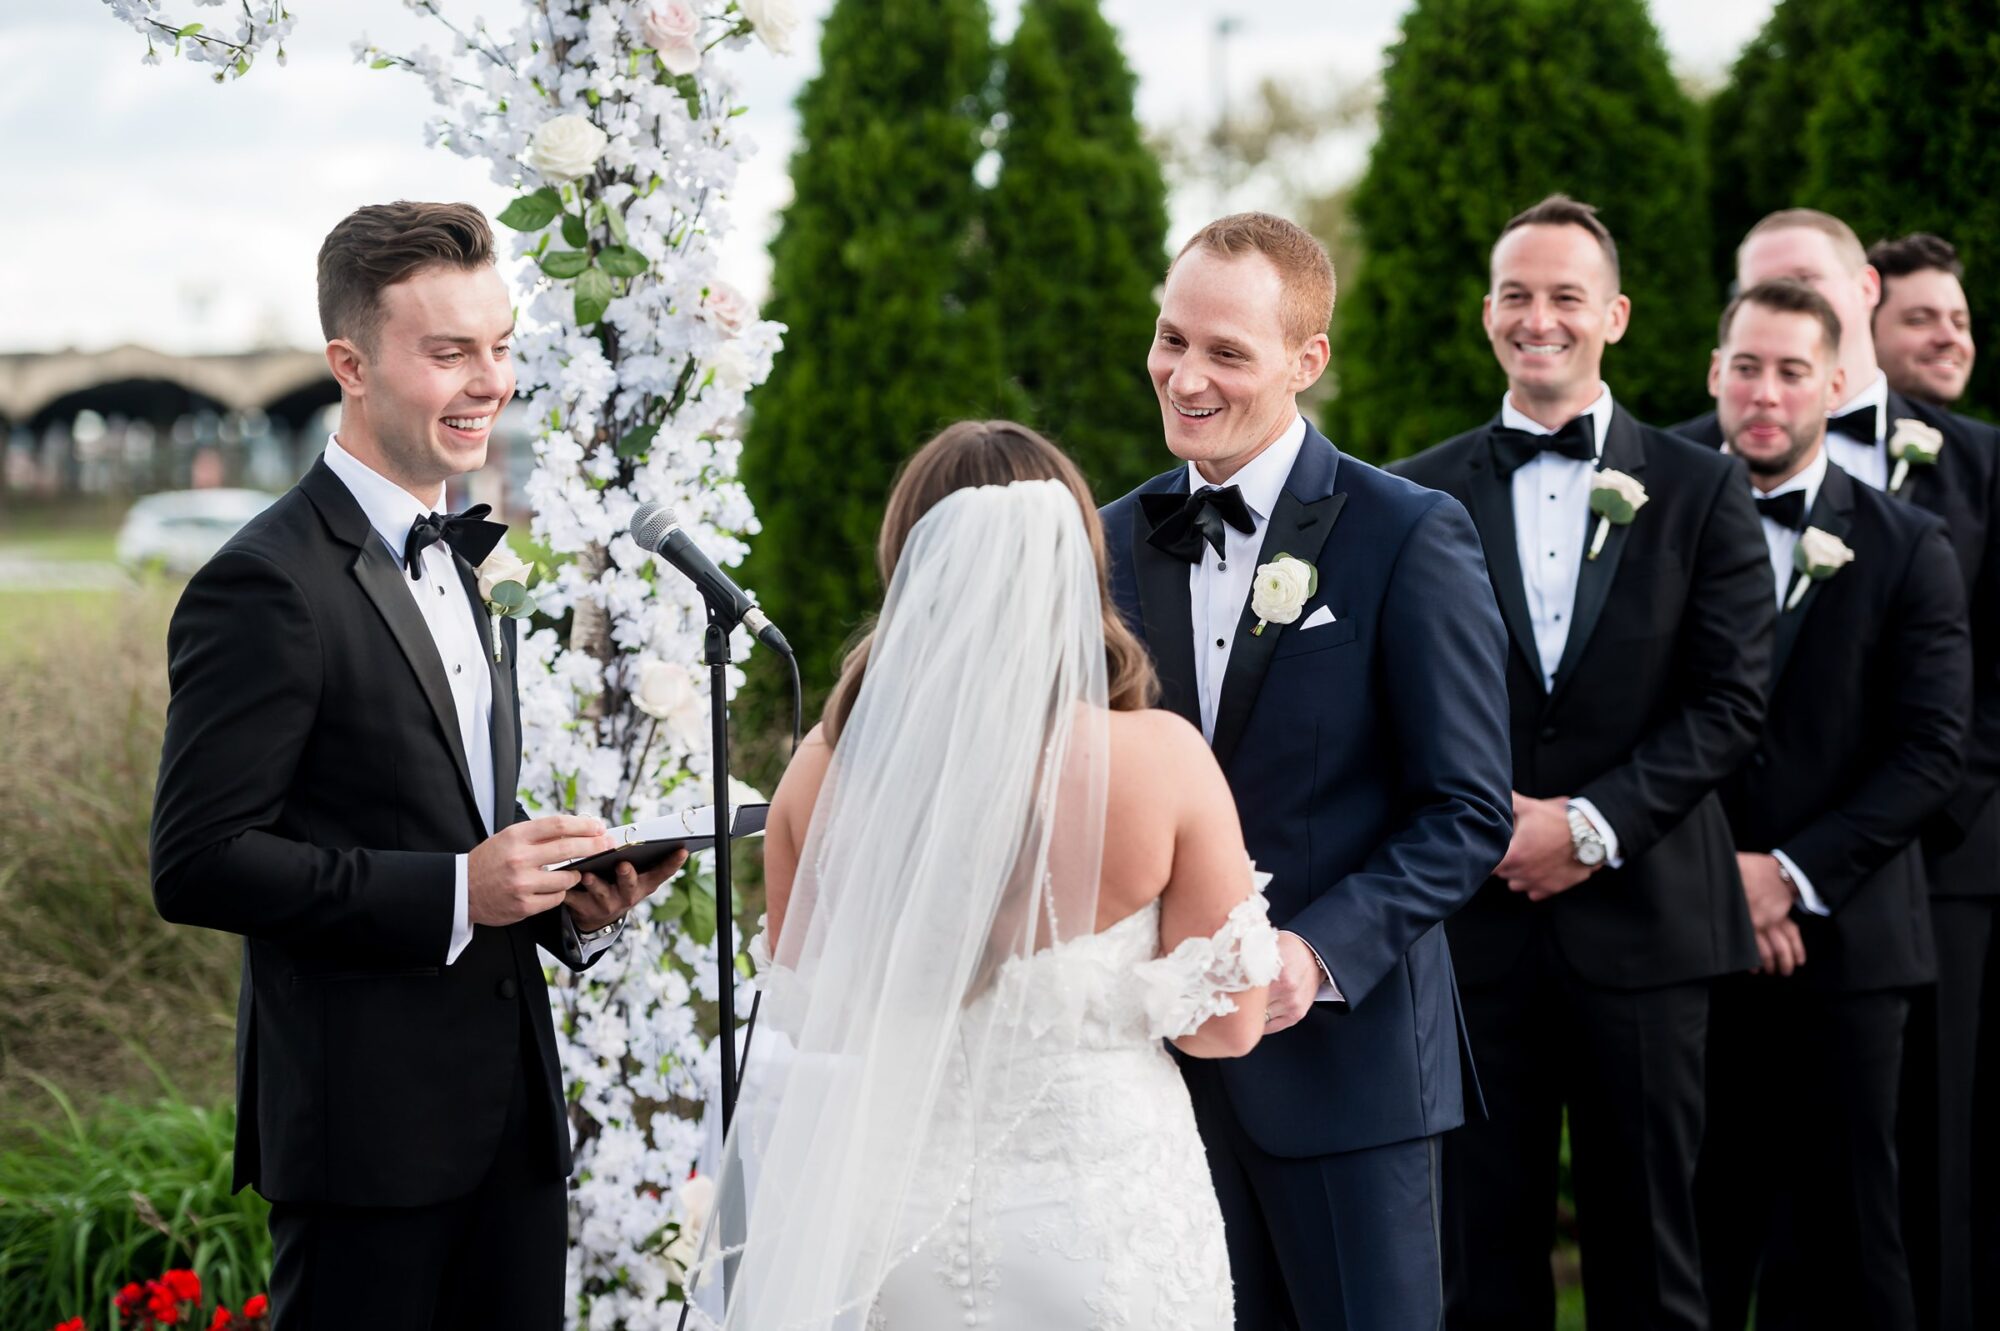 A wedding ceremony with bride and groomsmen in tuxedos.